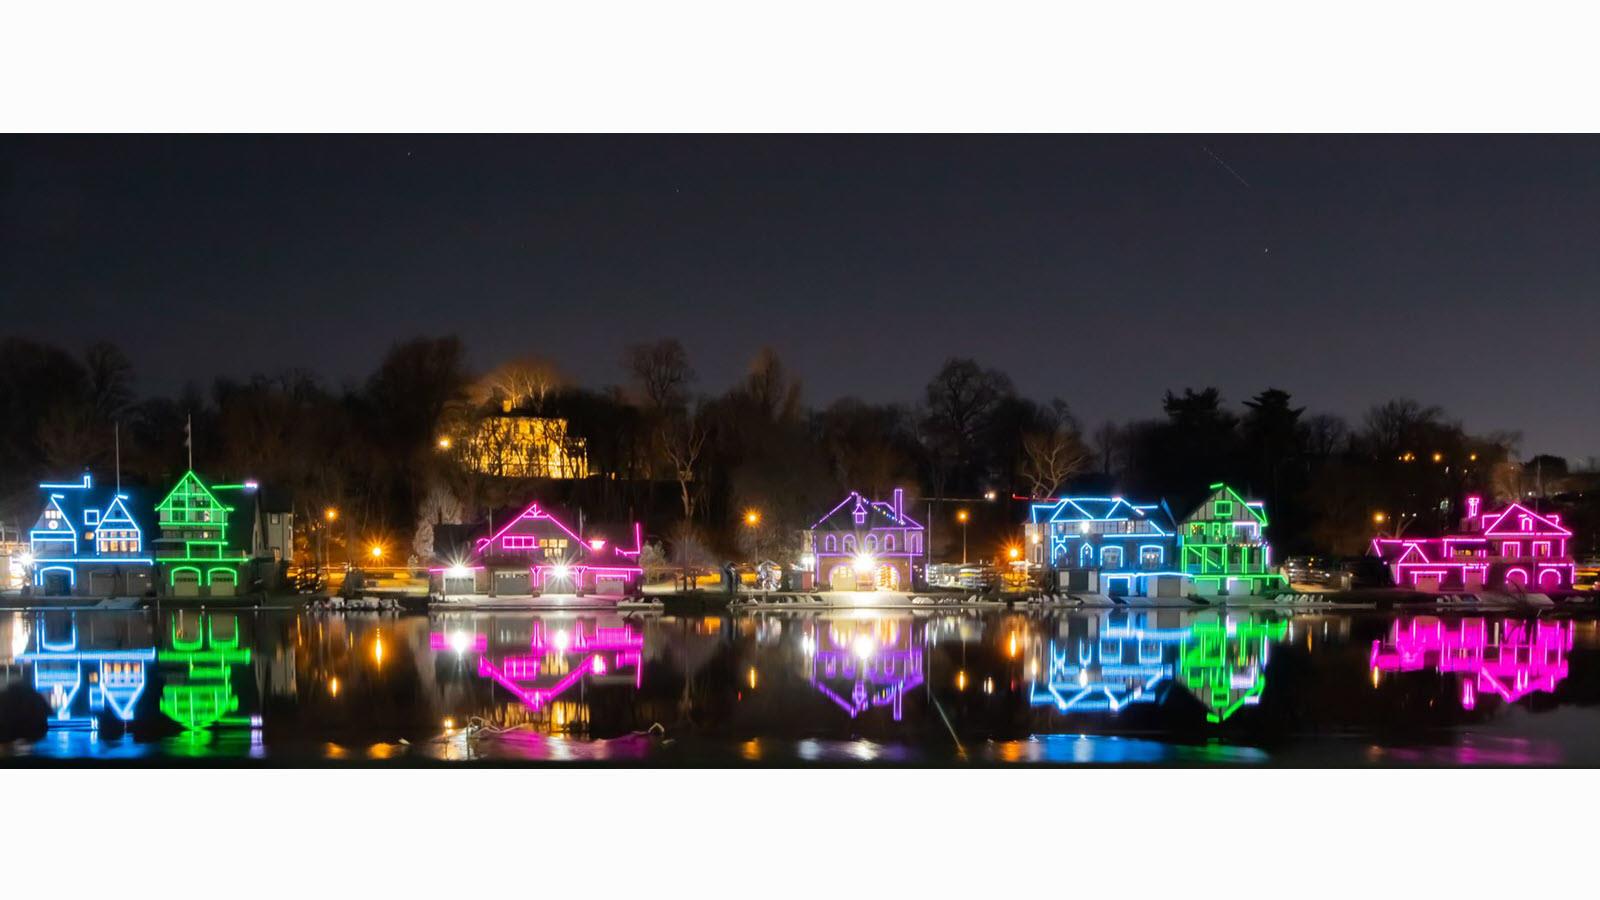 Philadelphia's Boathouse Row illuminated in the blue, green, pink and purple colors of Rare Disease Day